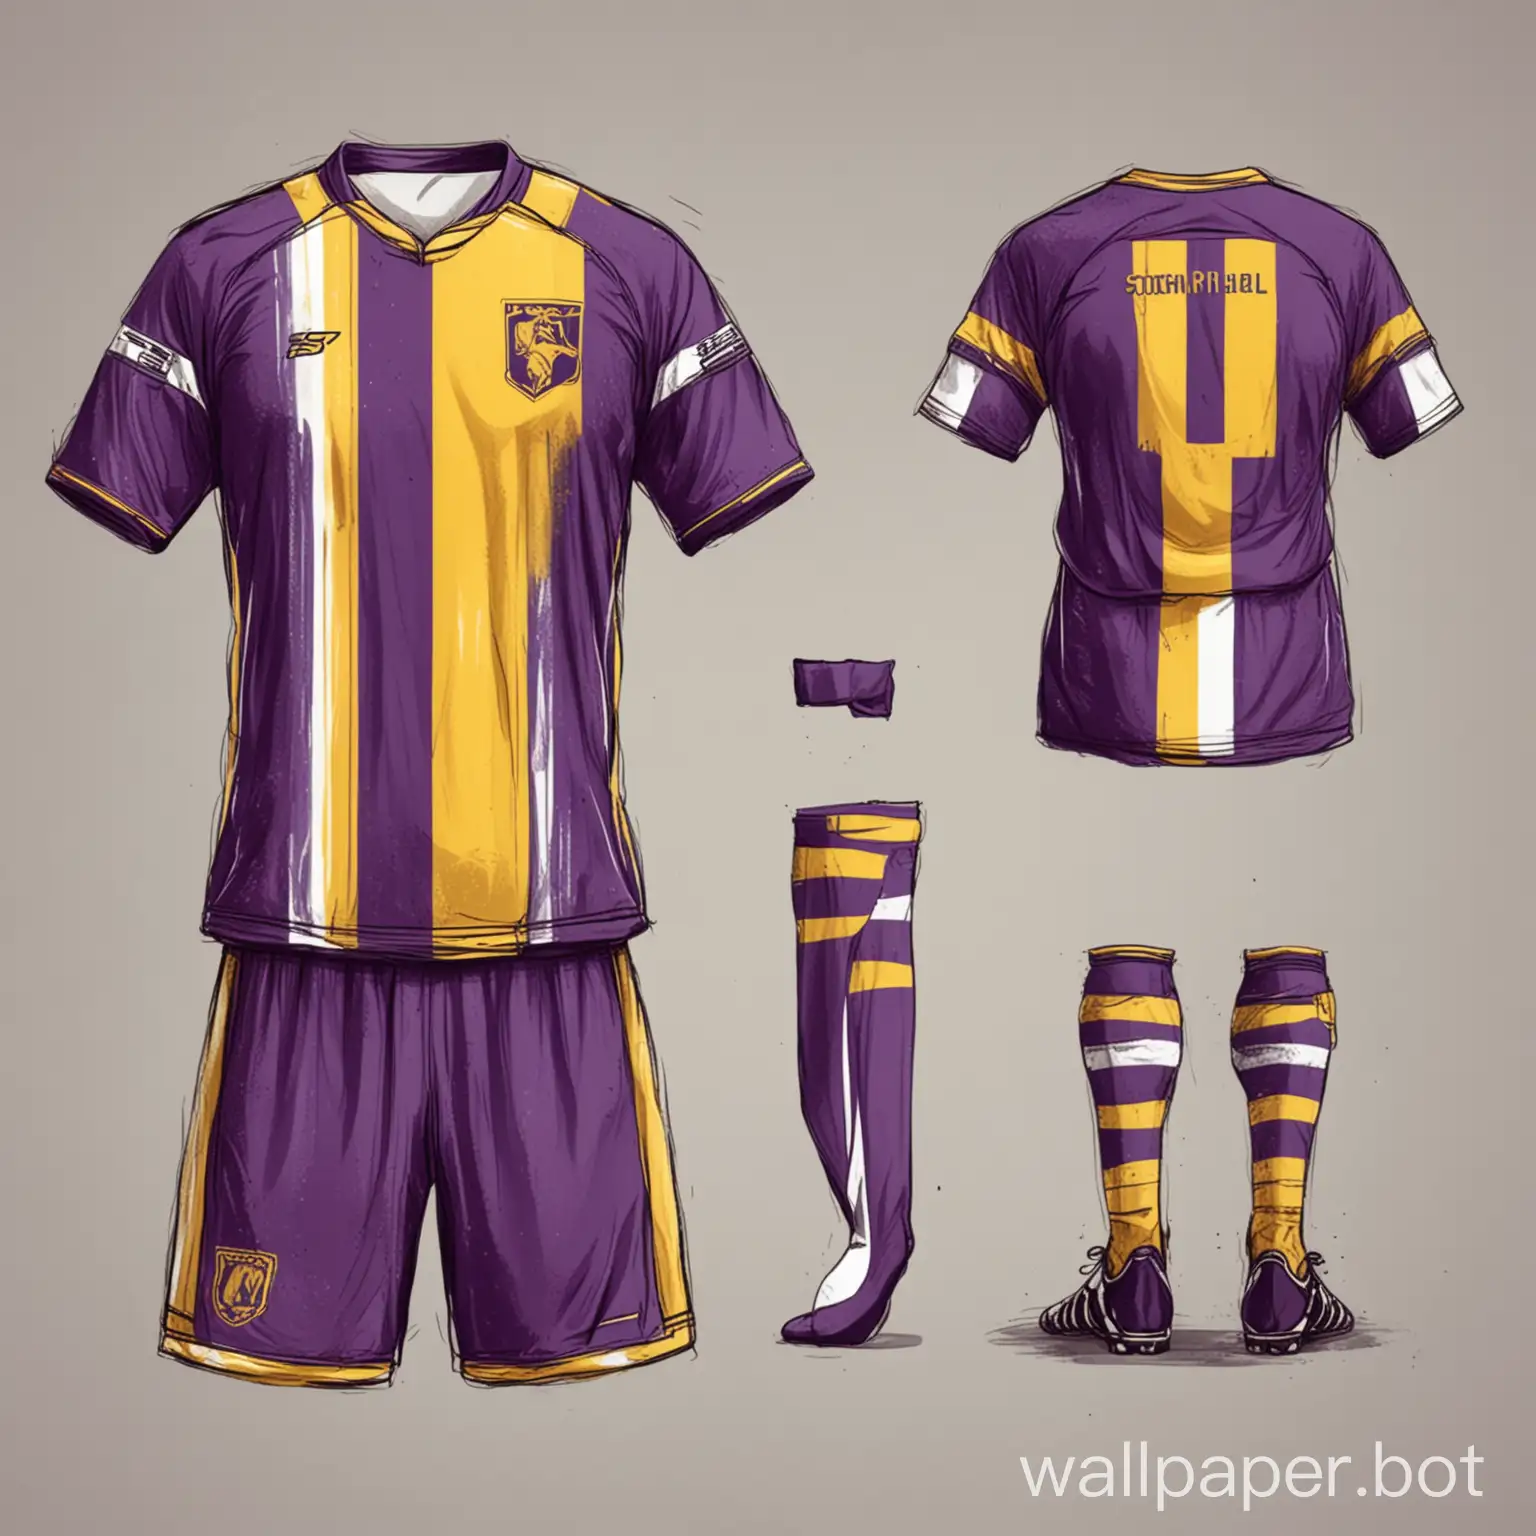 Soccer-Players-in-Vibrant-Purple-and-Yellow-Uniforms-on-a-Clean-White-Background-Sketch-Concept